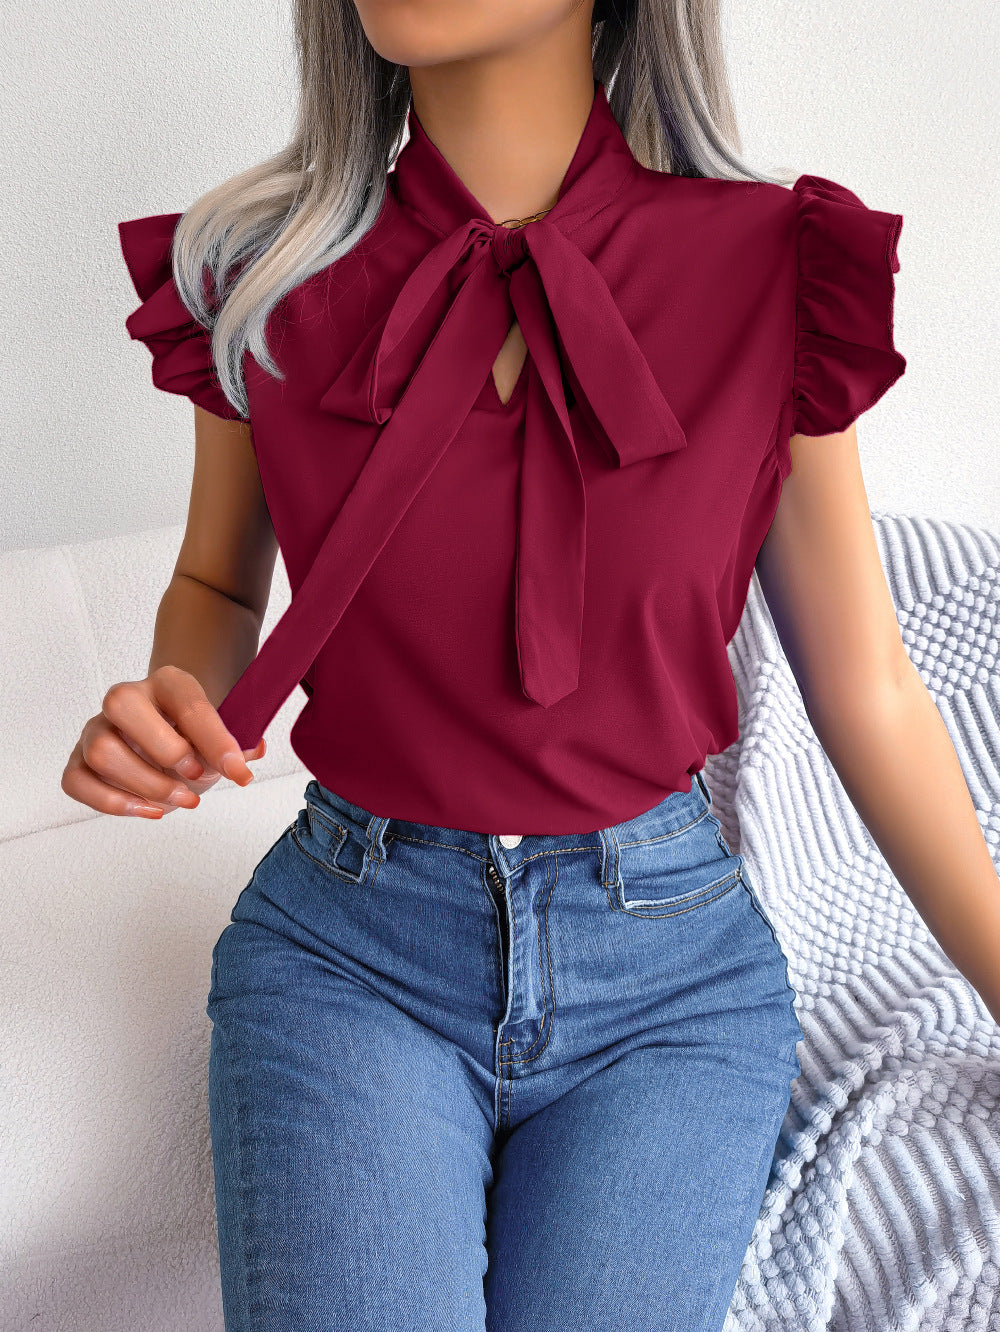 Women's Temperament Commute Stringy Seedge Lace-up Bow Blouses